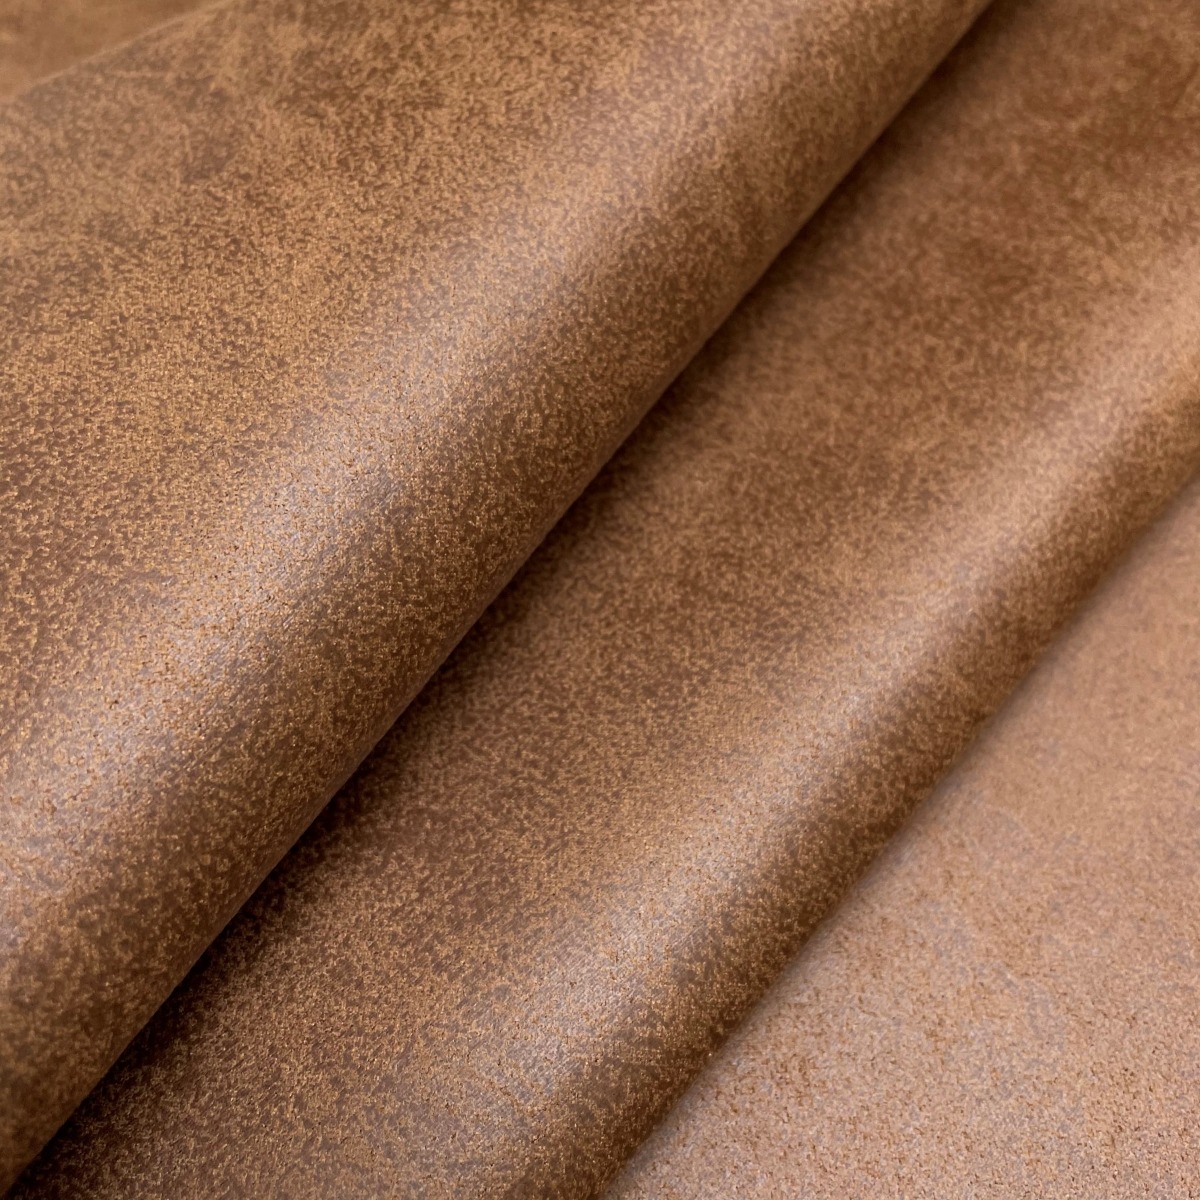 Inca Tan Distressed Look Luxury Leather Upholstery Fabric